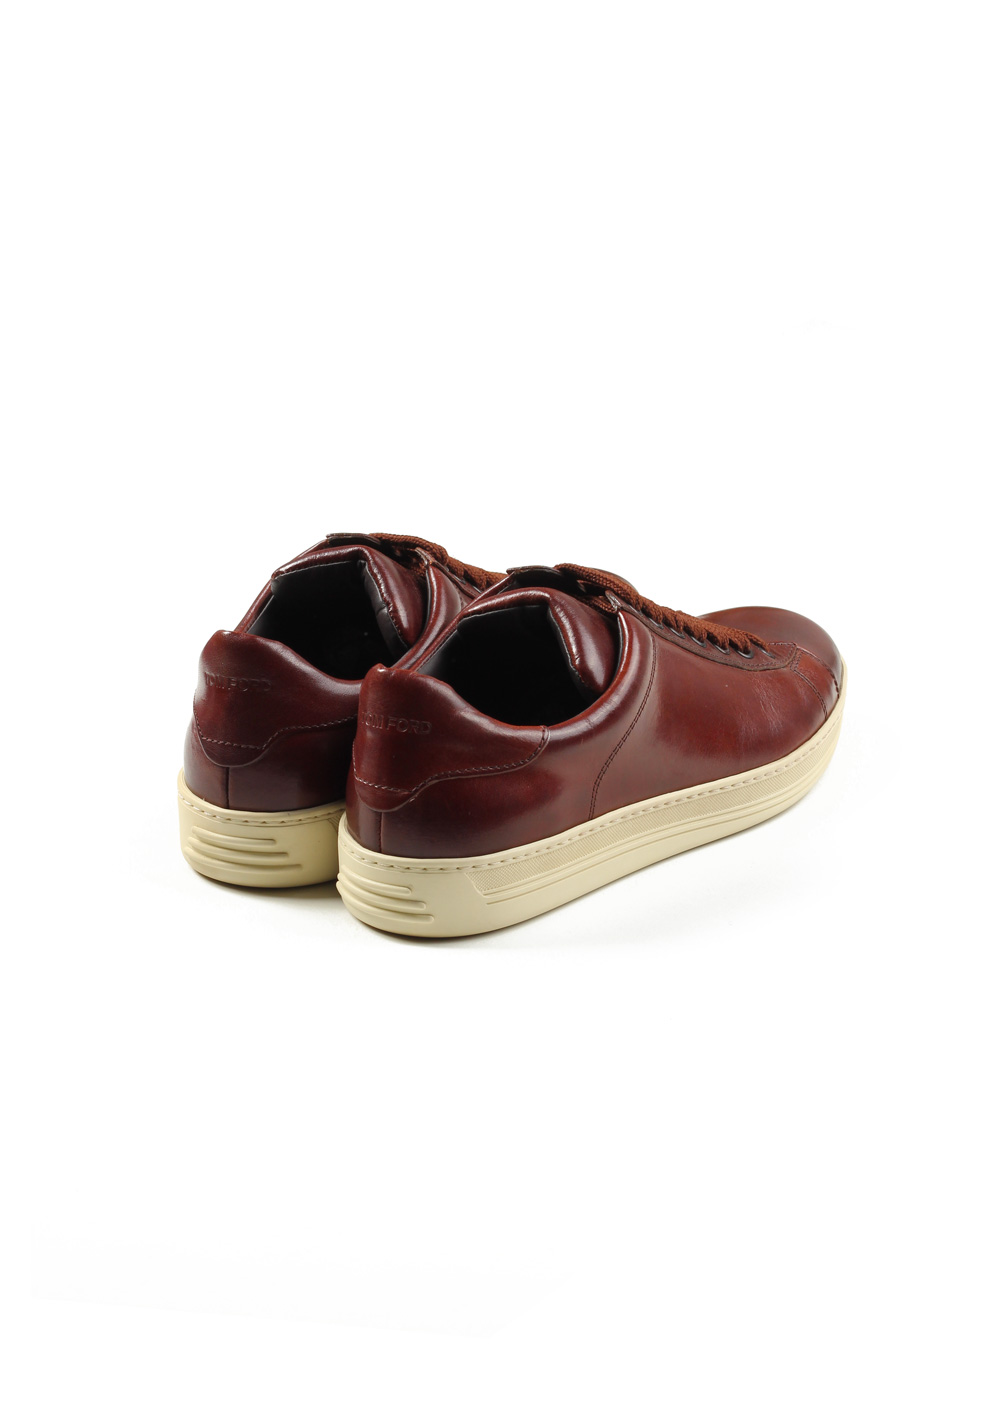 TOM FORD Russel Low Top Brown Leather Sneaker Shoes Size 8.5 Uk / 9.5 U.S. | Costume Limité